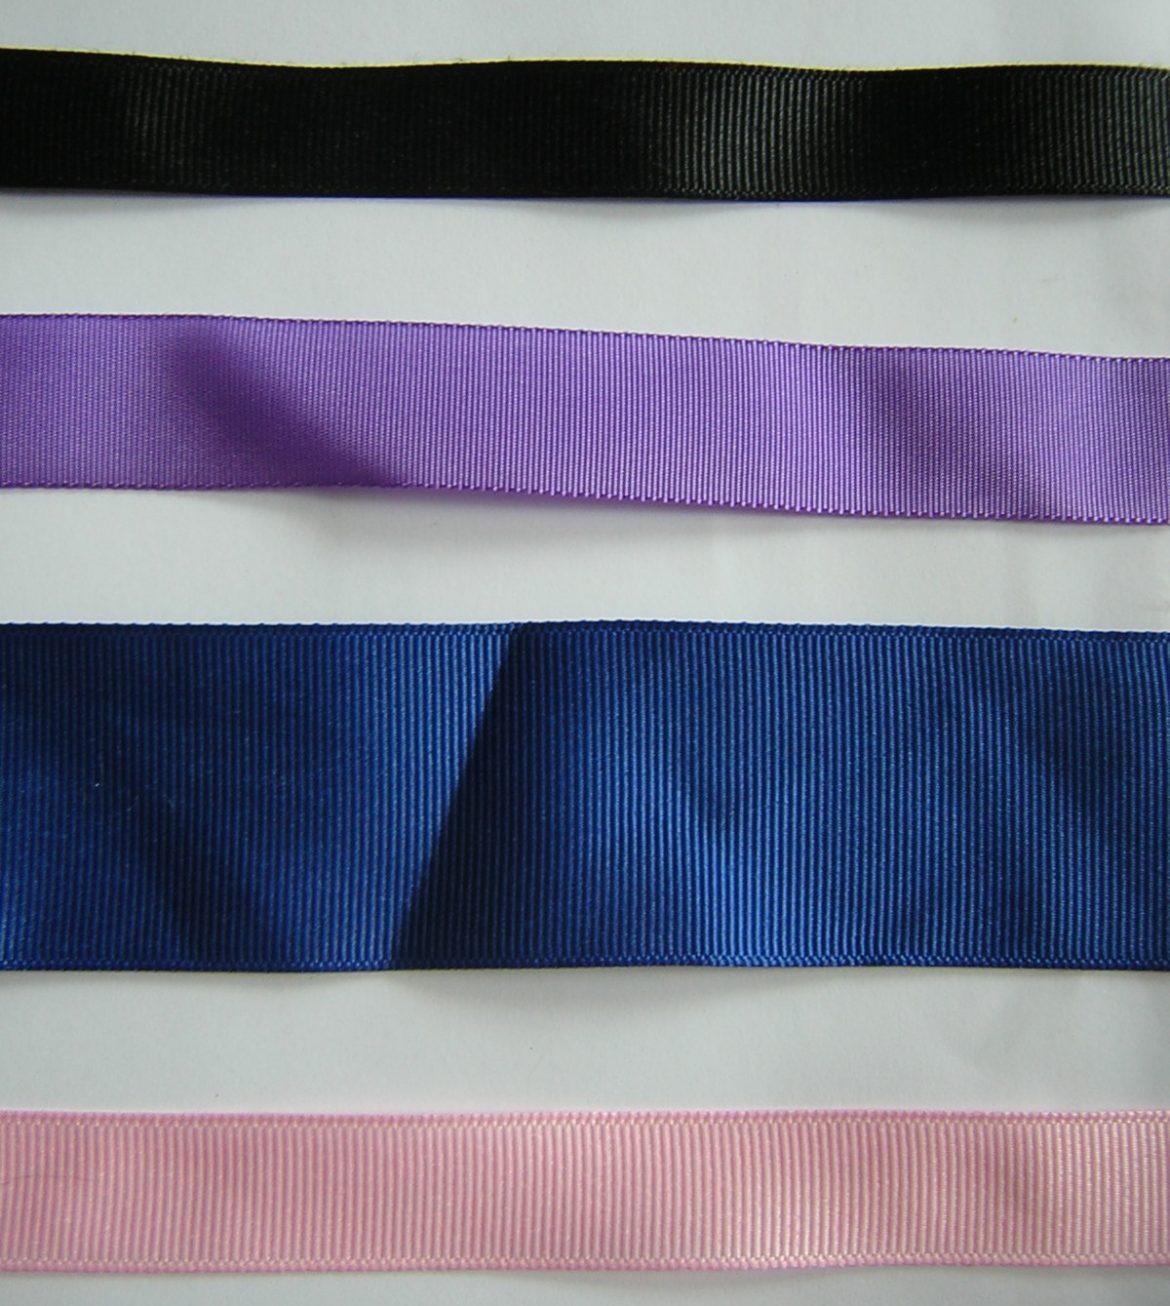 Grosgrain vs. Satin Ribbon: What’s the Difference